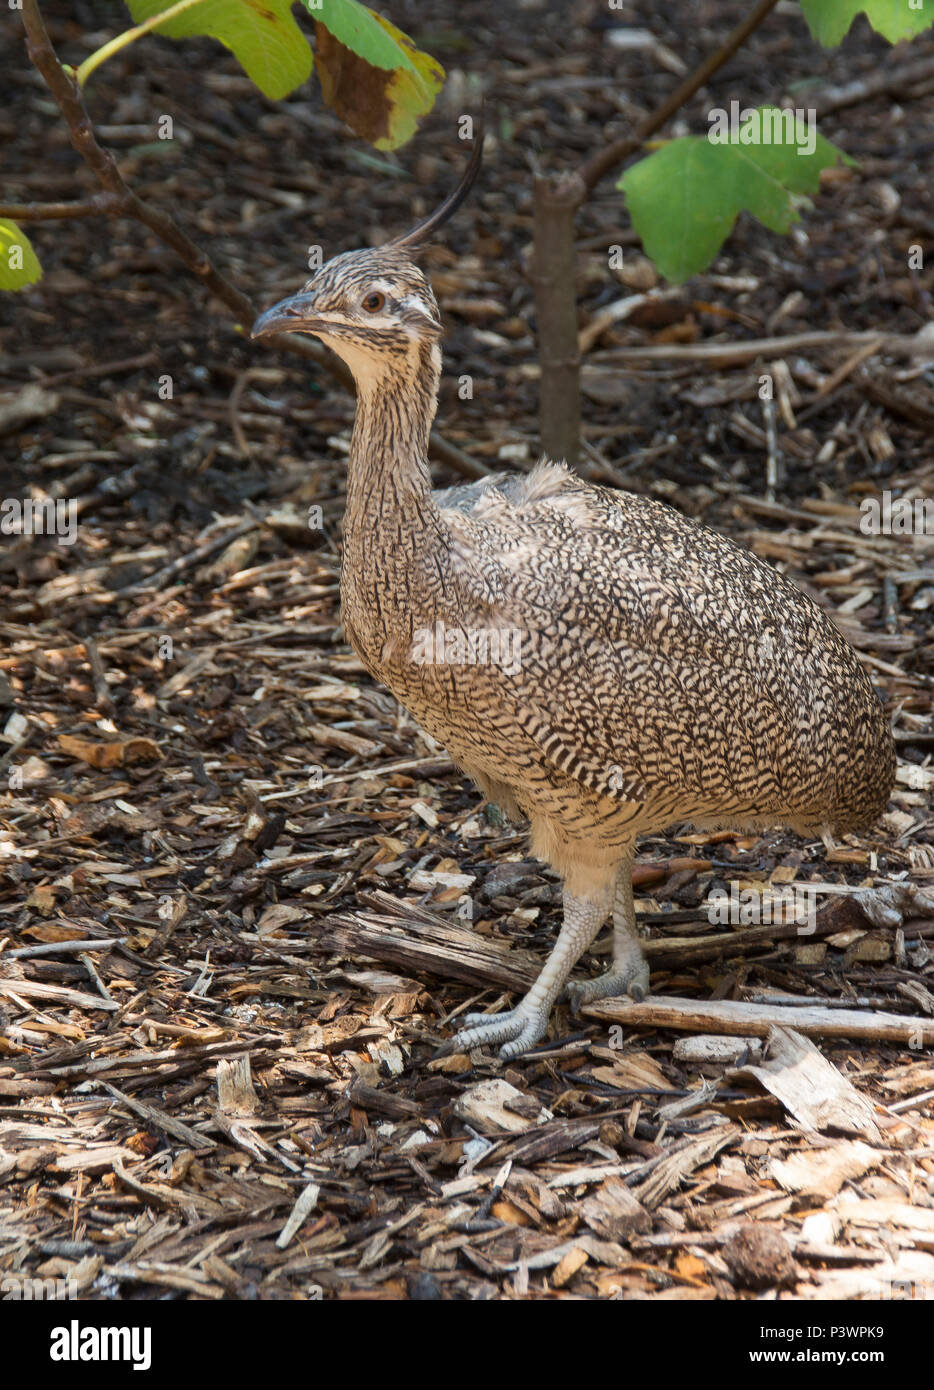 An Elgant Crested walks in the yard a bird park located in Scotland Neck North Carolina Stock Photo